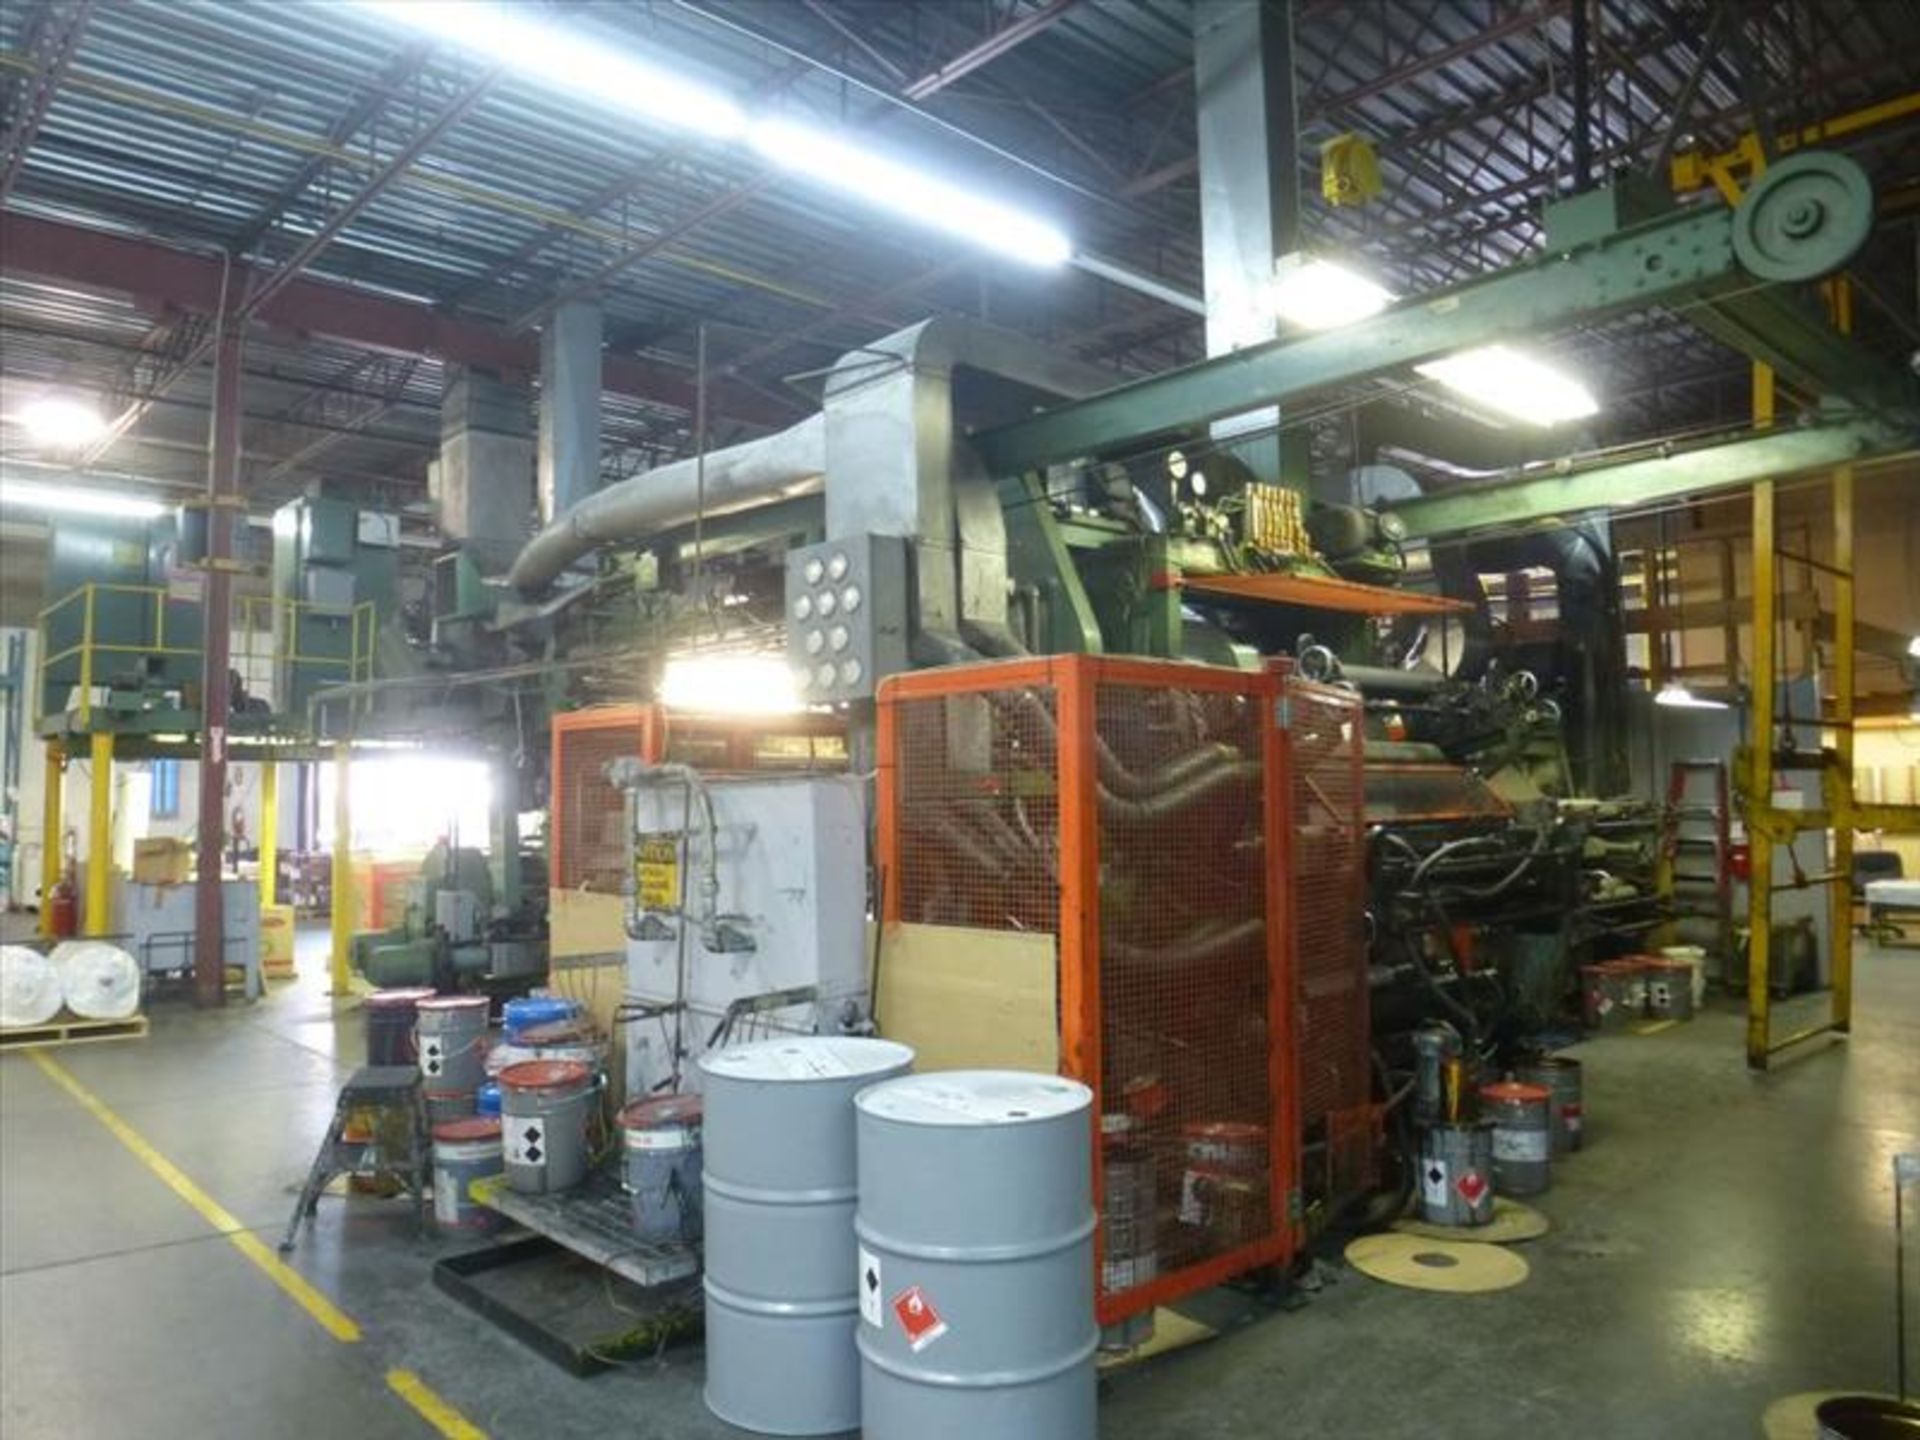 PCMC (Paper Converting Machine Co.) 6-colour central impression flexographic printing press, 56" - Image 4 of 30